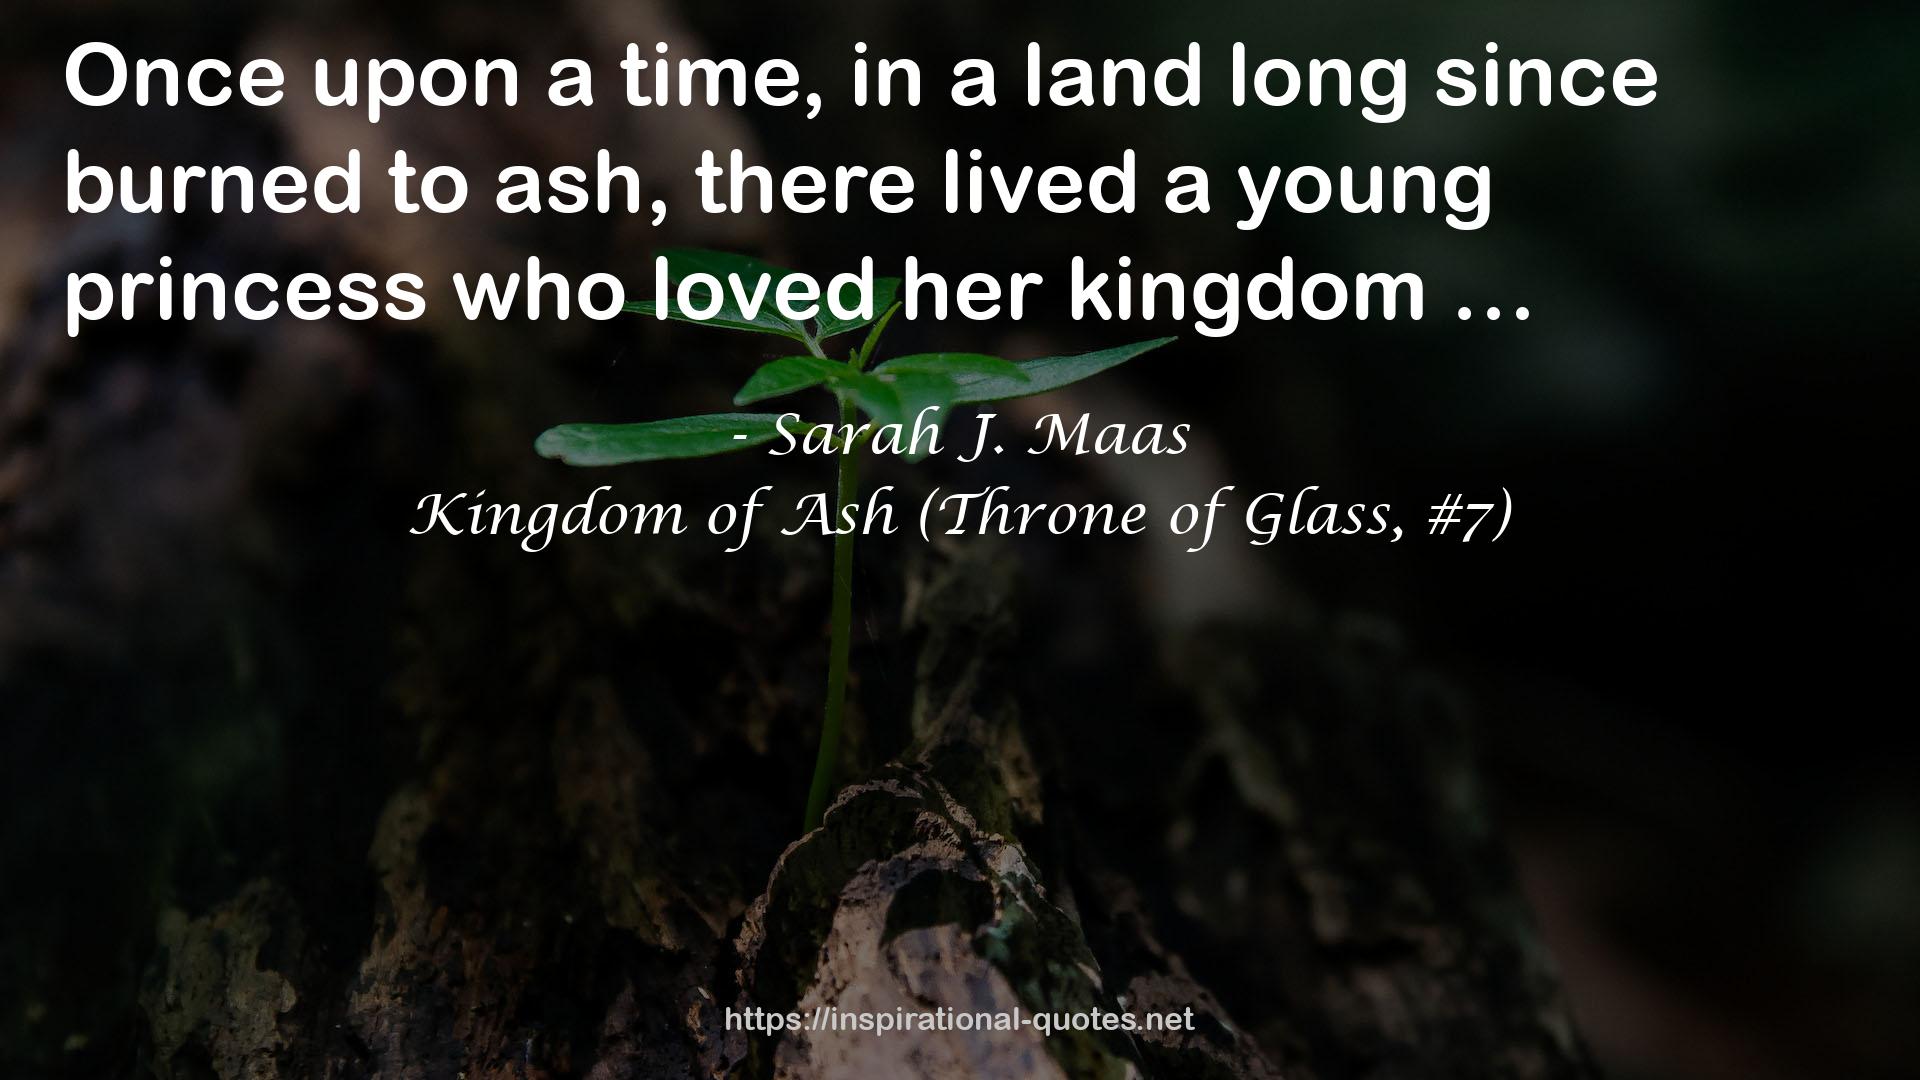 Kingdom of Ash (Throne of Glass, #7) QUOTES